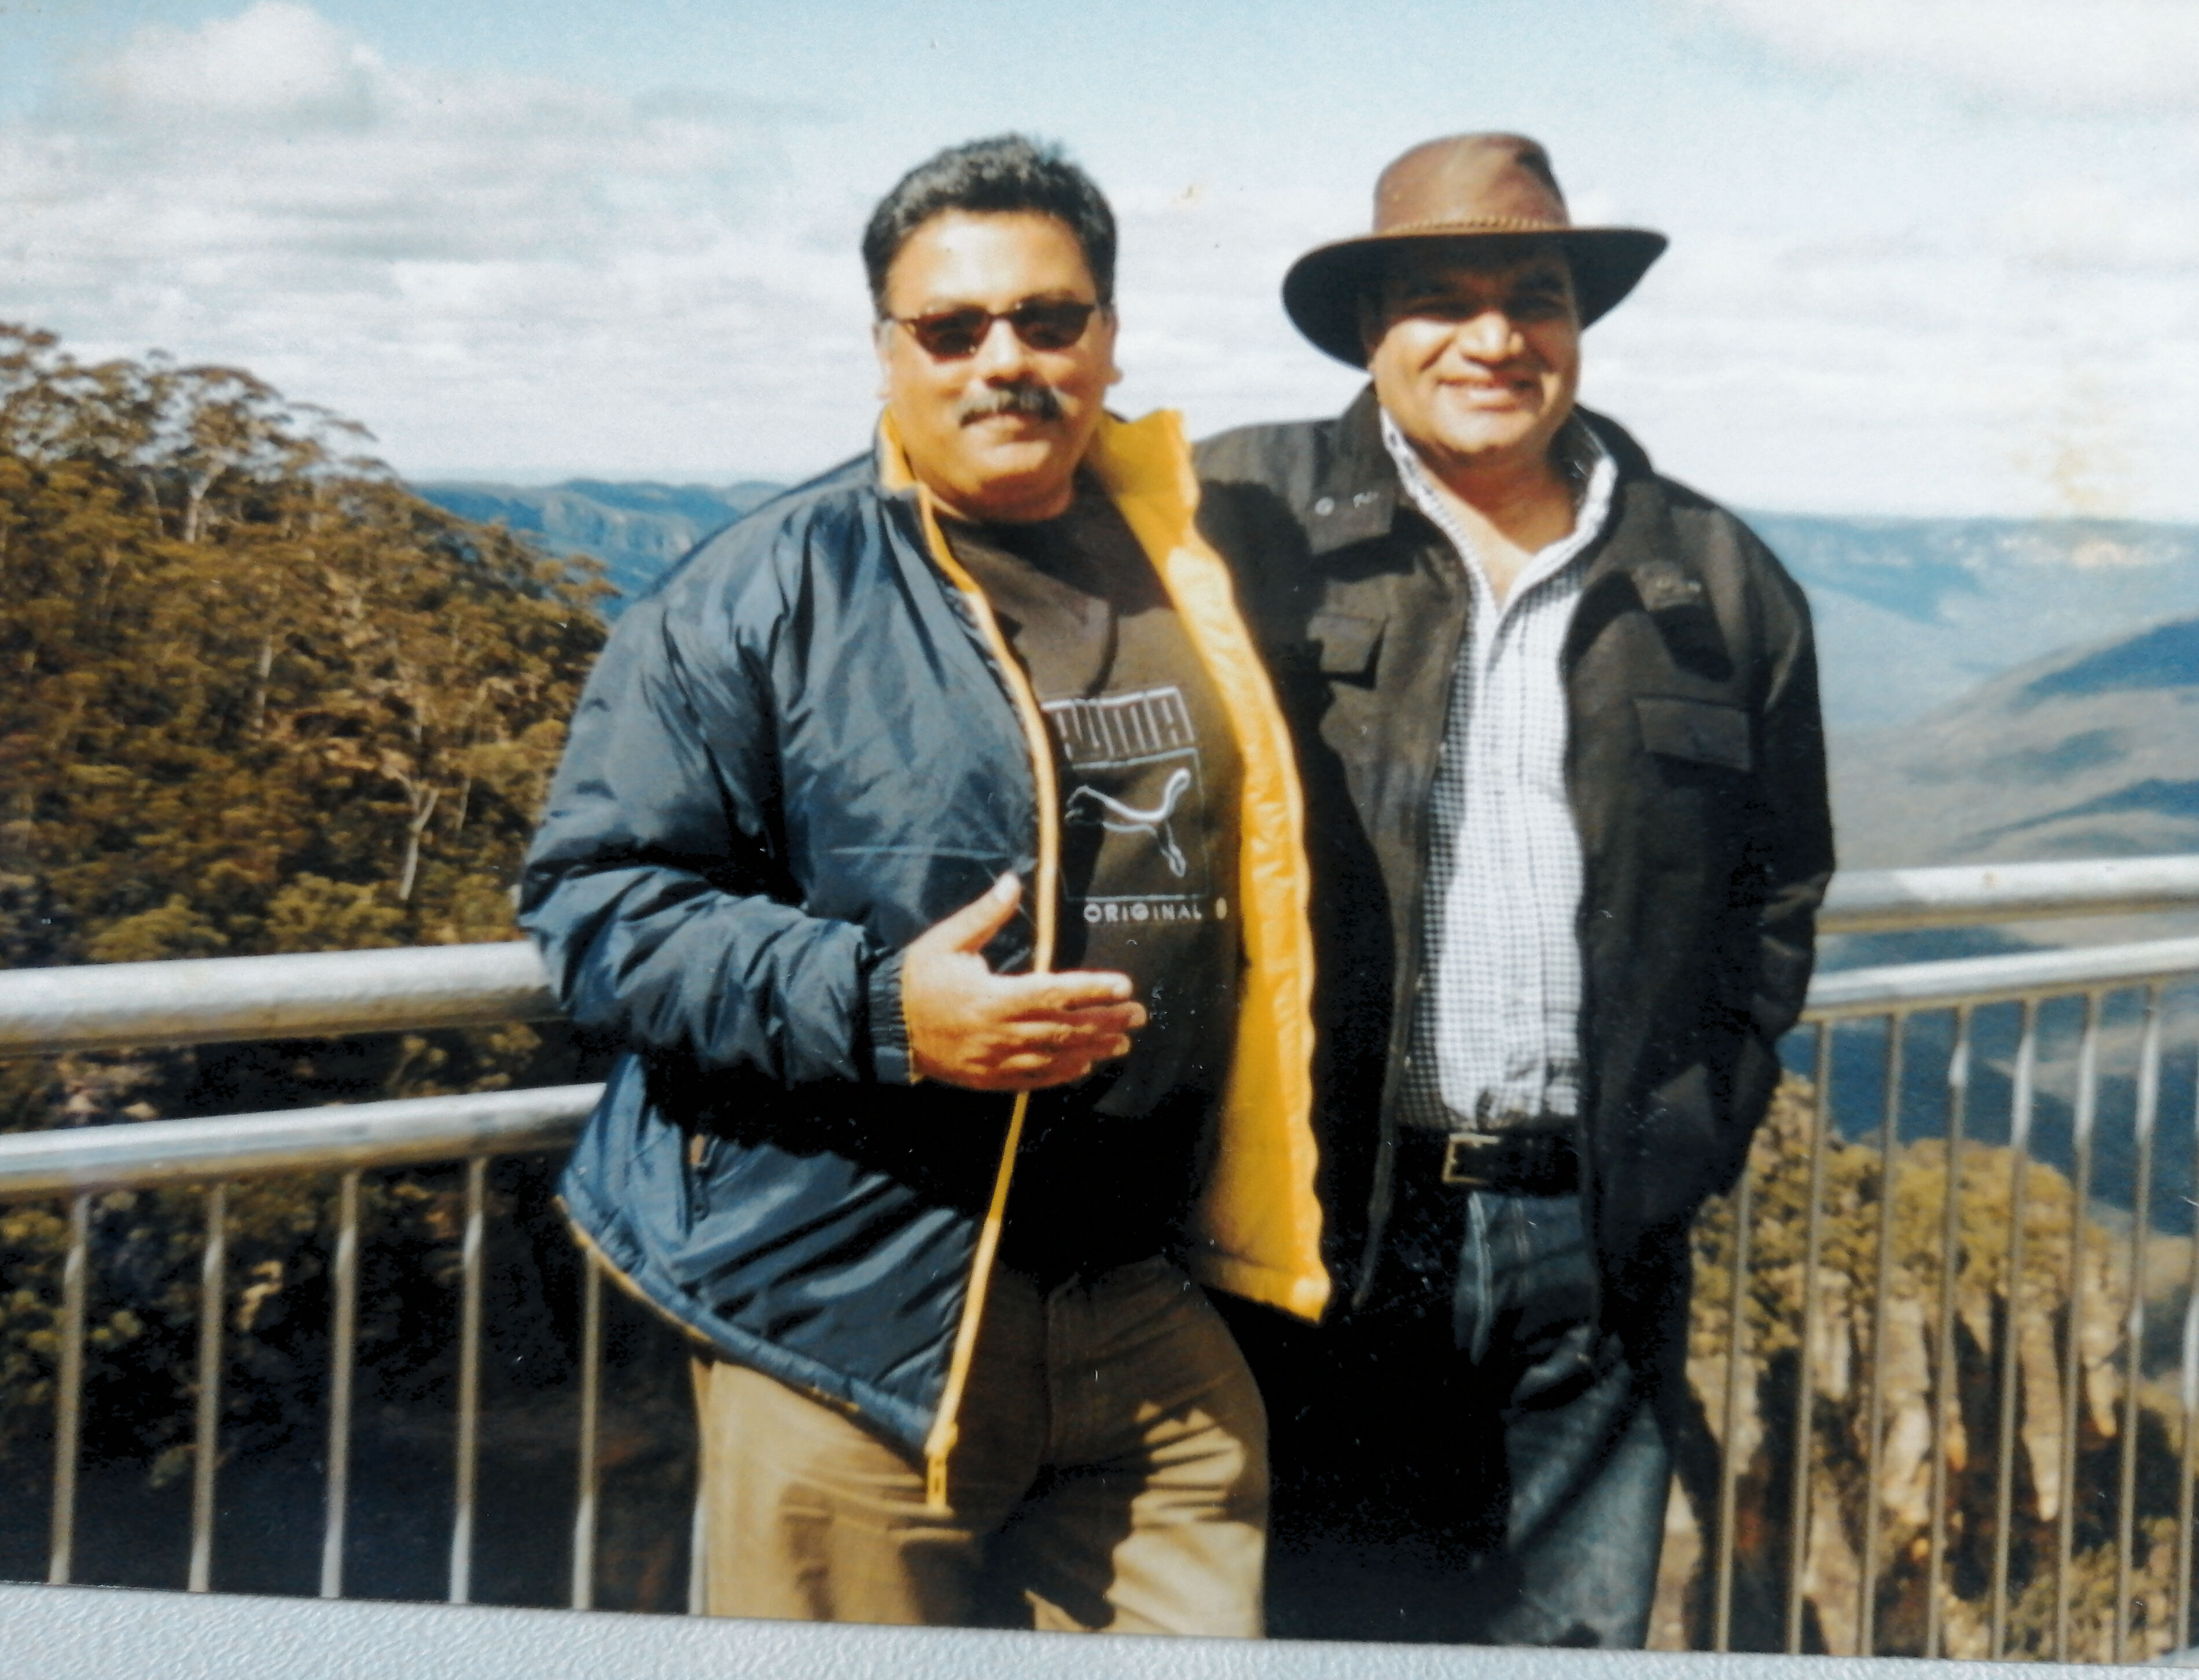 A visit to the Blue Mountains in September 2003